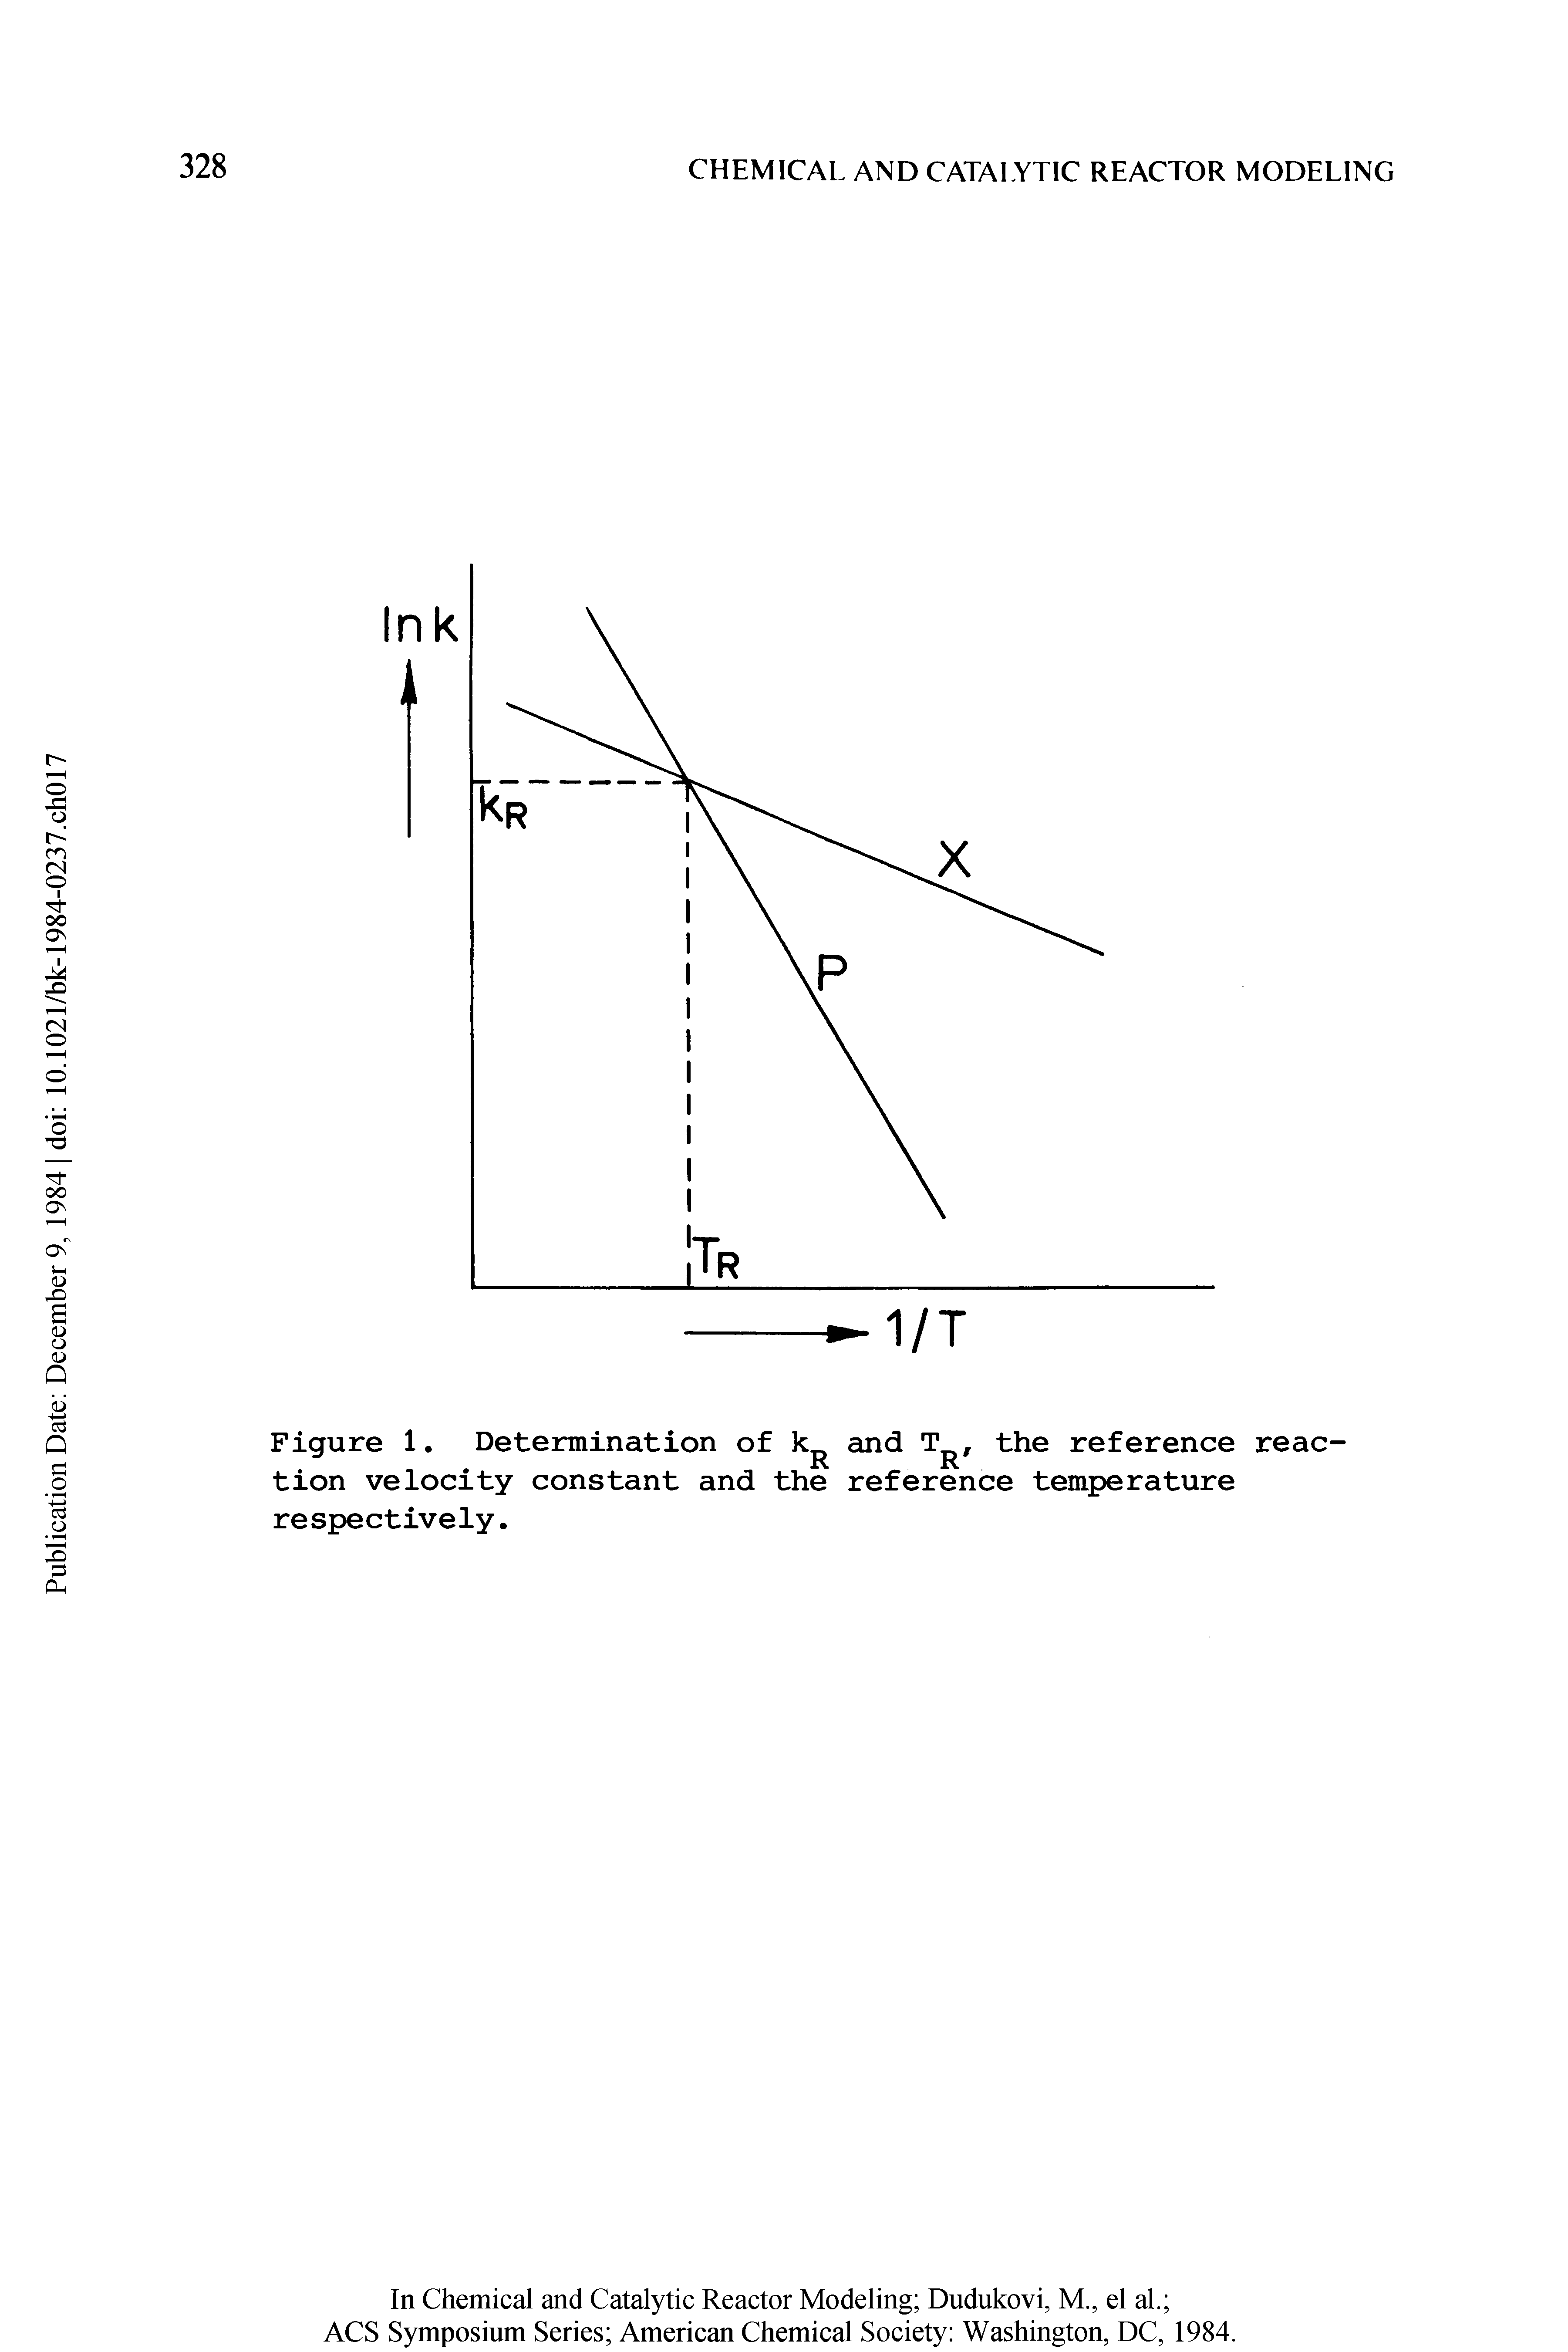 Figure 1. Determination of kR and TR, the reference reaction velocity constant and the reference temperature respectively.